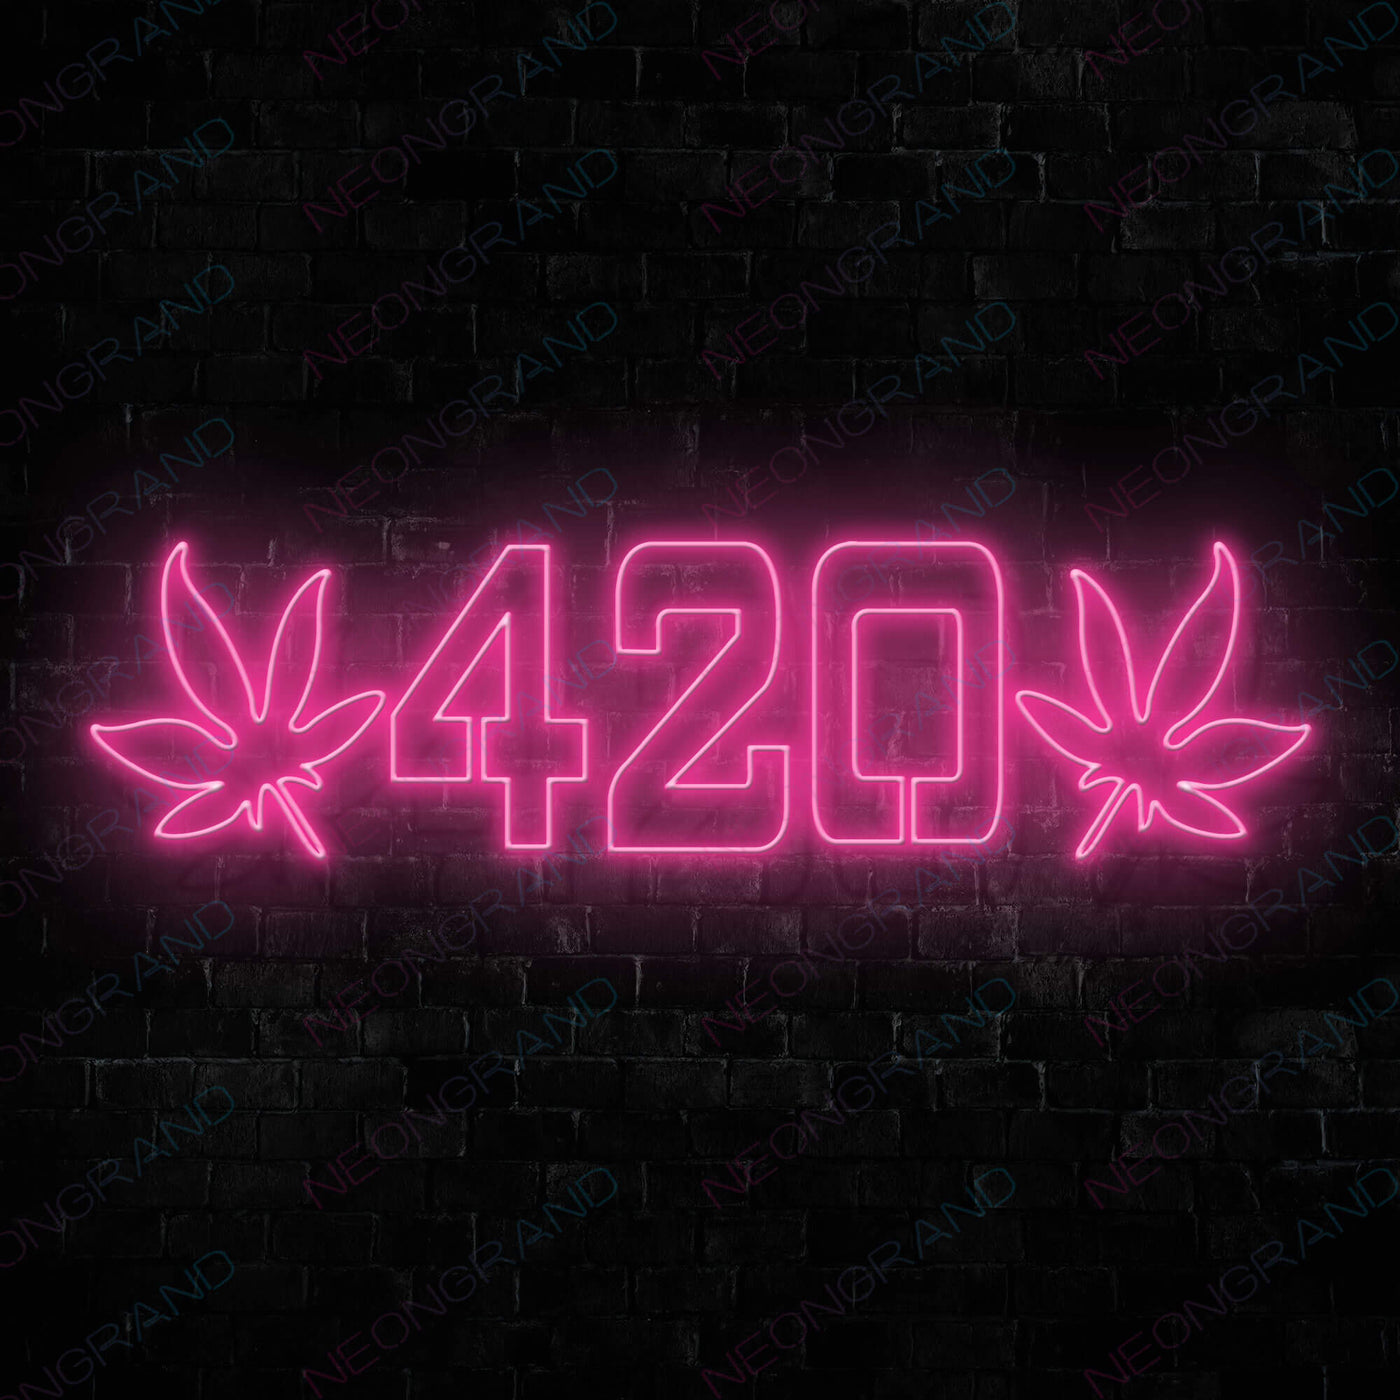 Cannabis 420 Weed Neon Sign Led Light pink